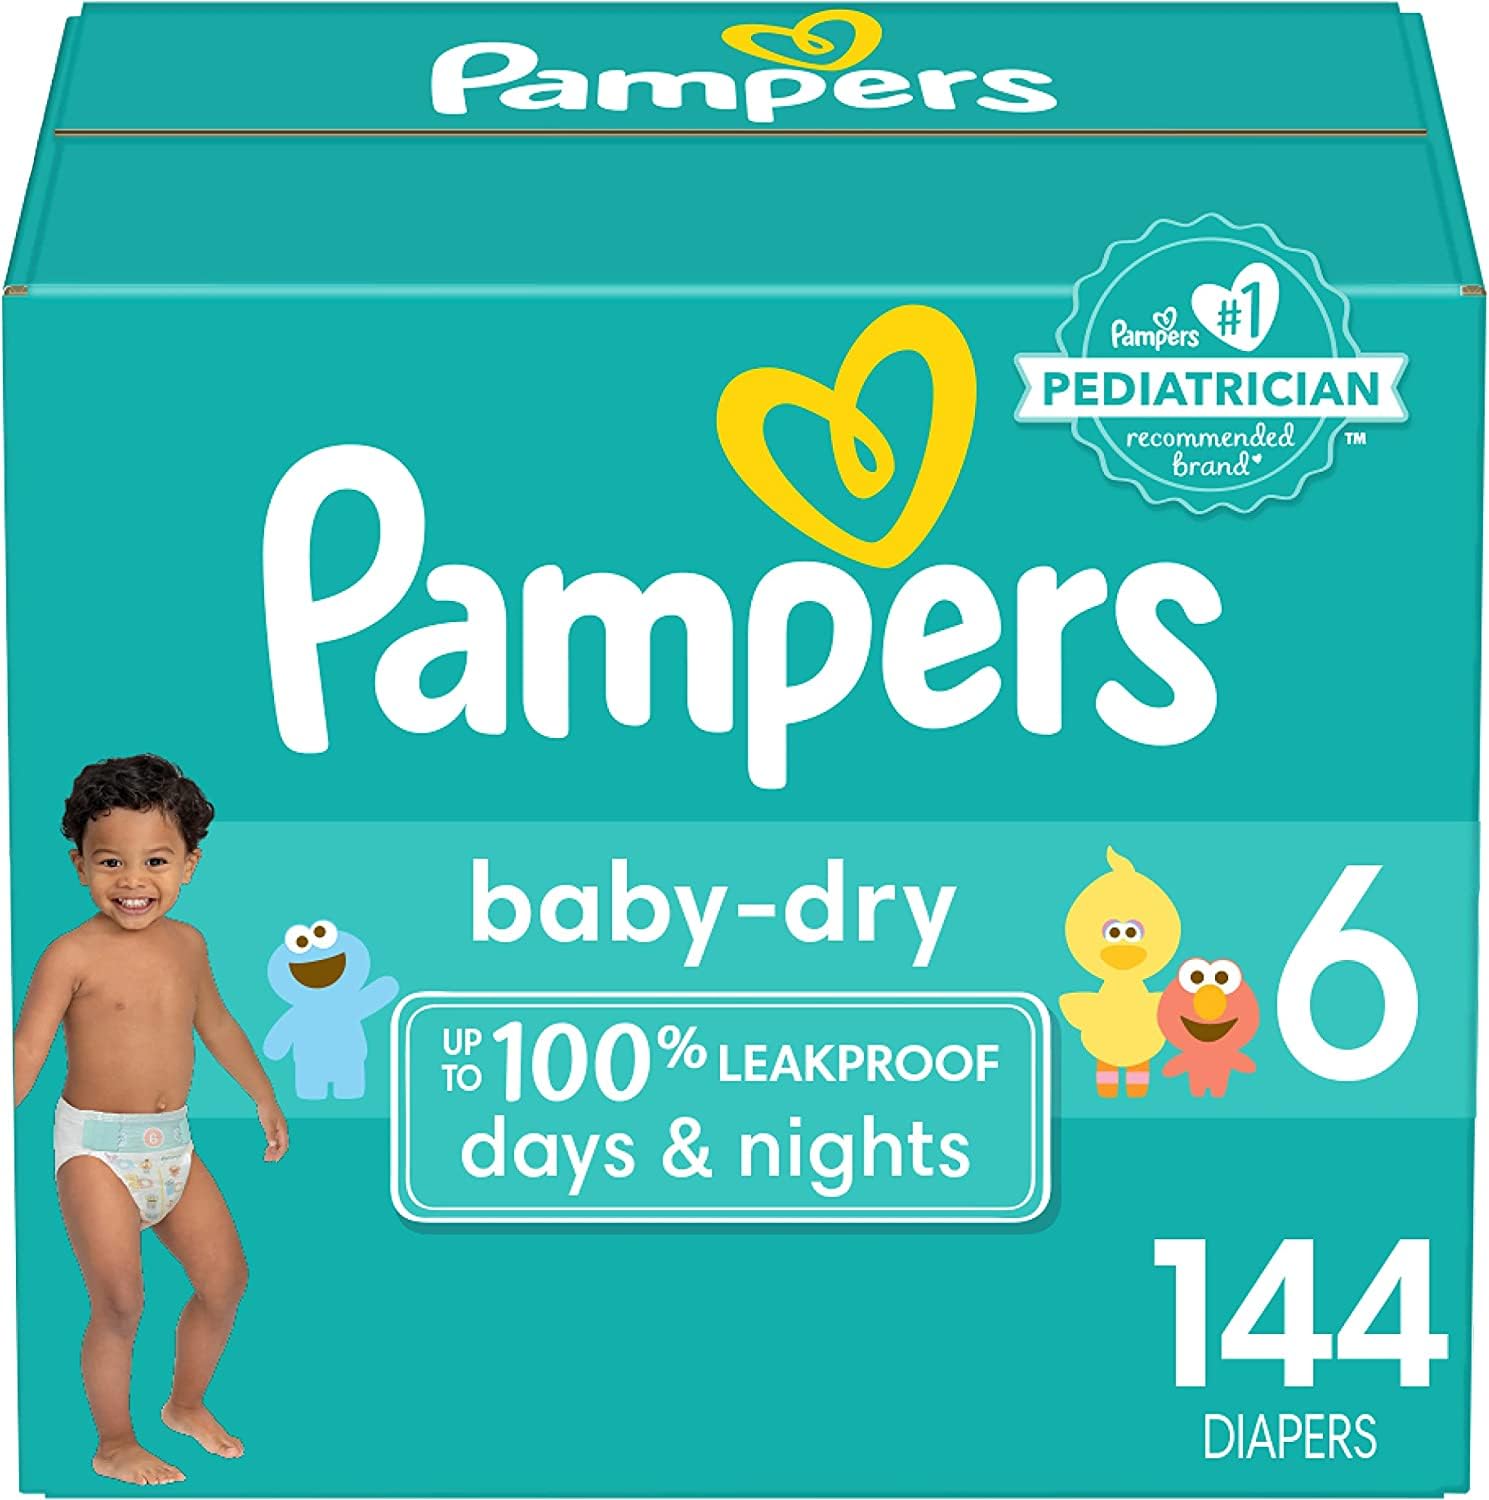 Diapers Size 6, 144 count - Pampers Baby Dry Disposable Diapers